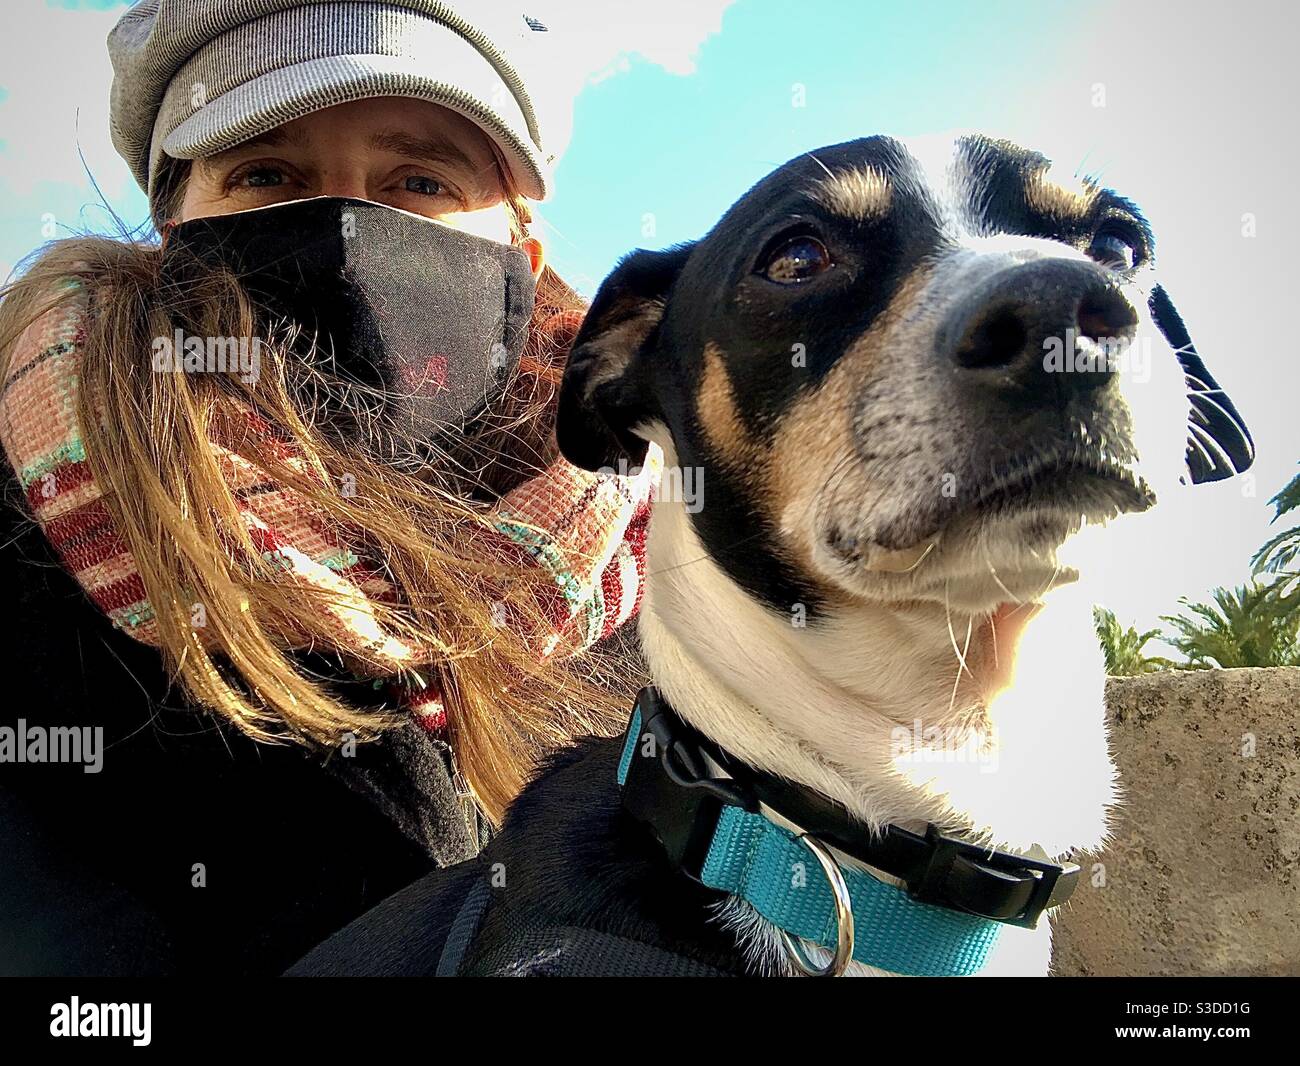 Dog facing camera with his masked owner Stock Photo